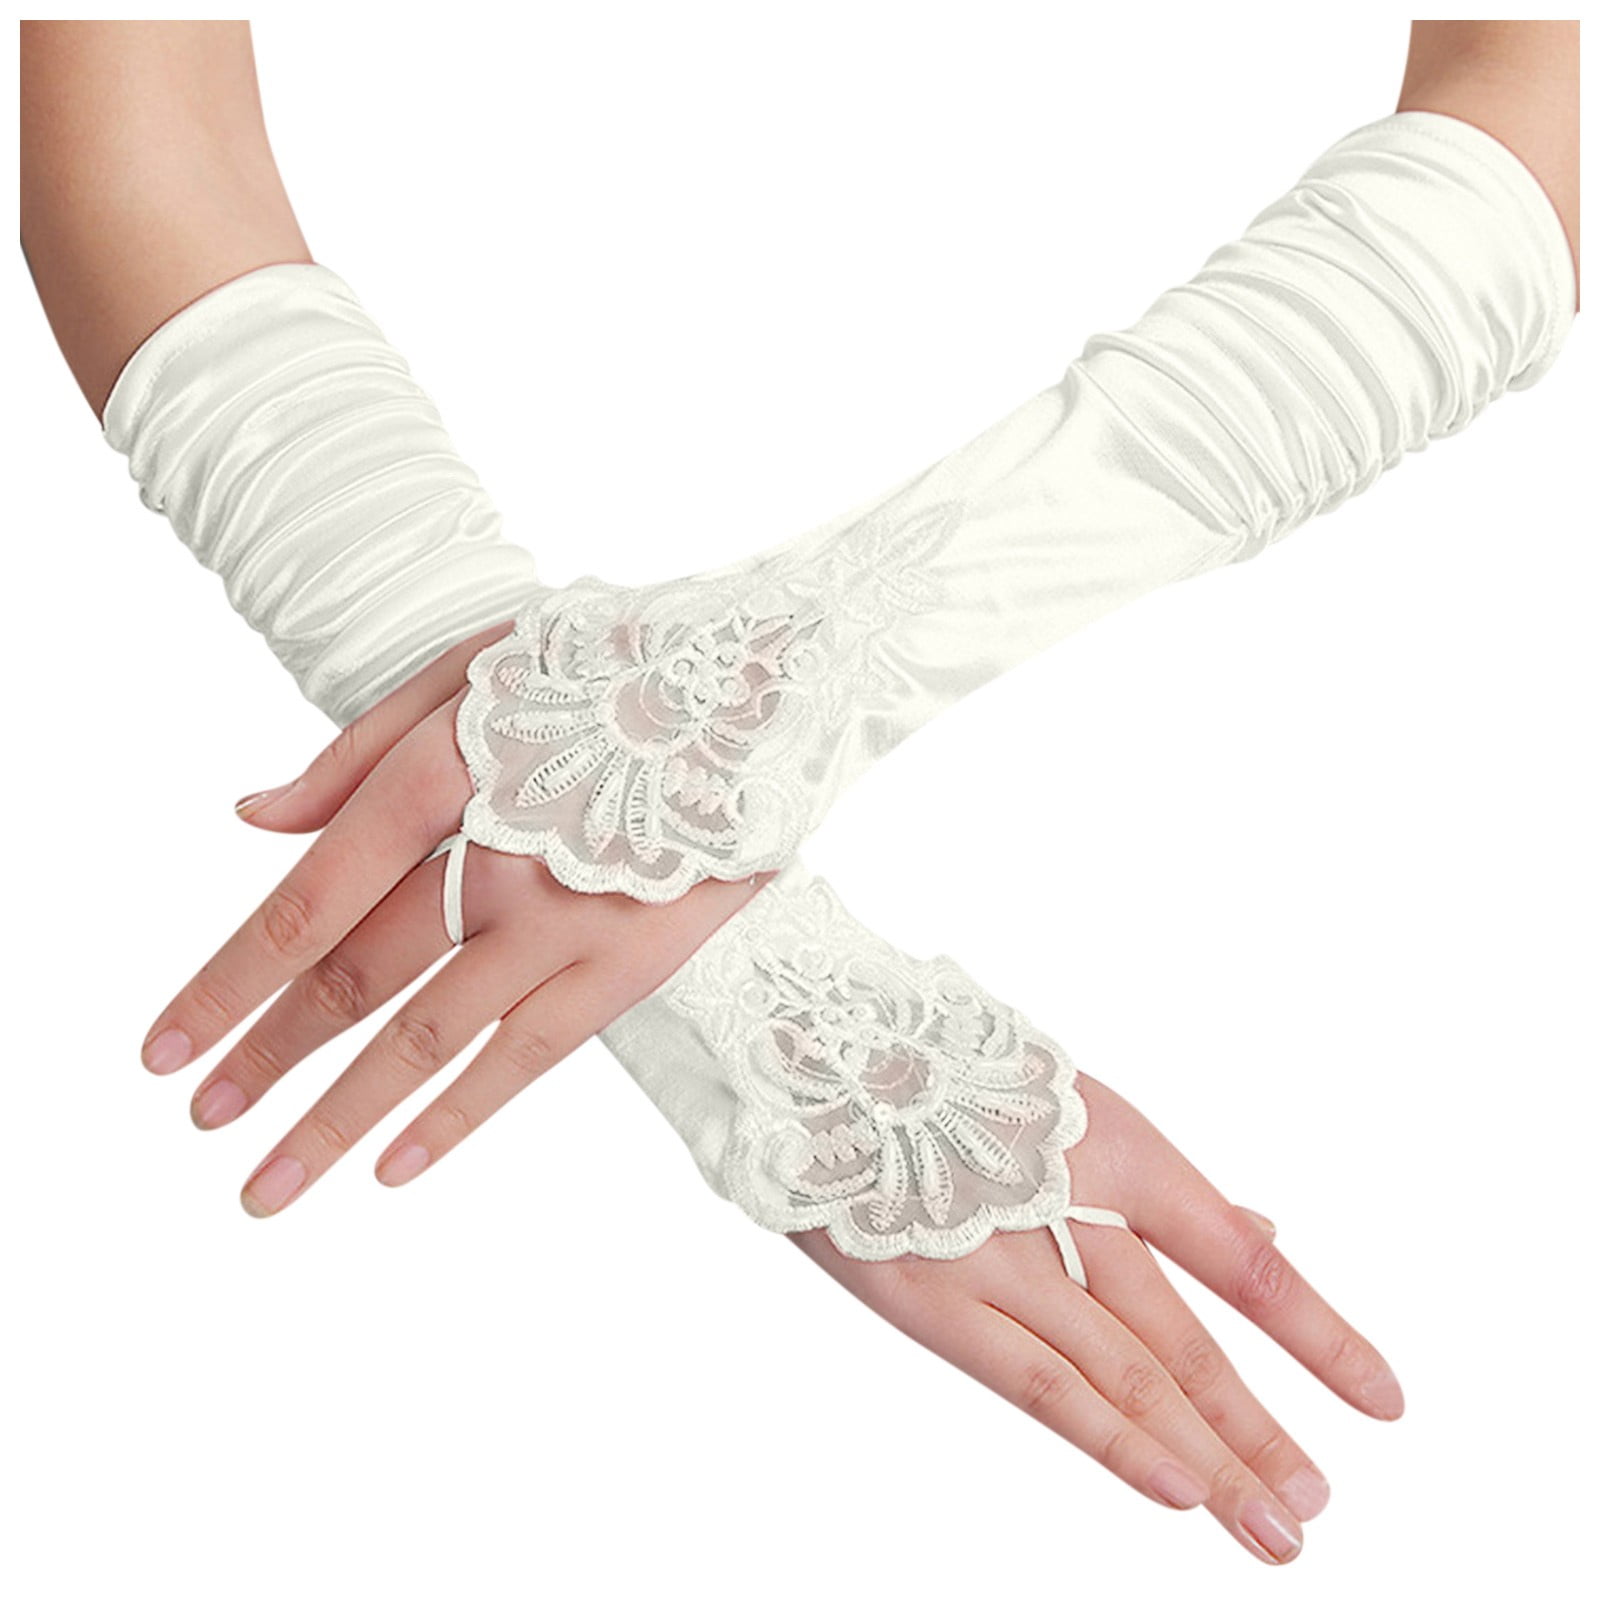 Satin Gloves for Wedding Bridal 1920s Long Lace Gloves Flapper Gloves Elbow Length Gloves Wedding Bride Fancy Dress Lace Opera Gloves for Christmas Long black Elbow Fingerless Lace Gloves